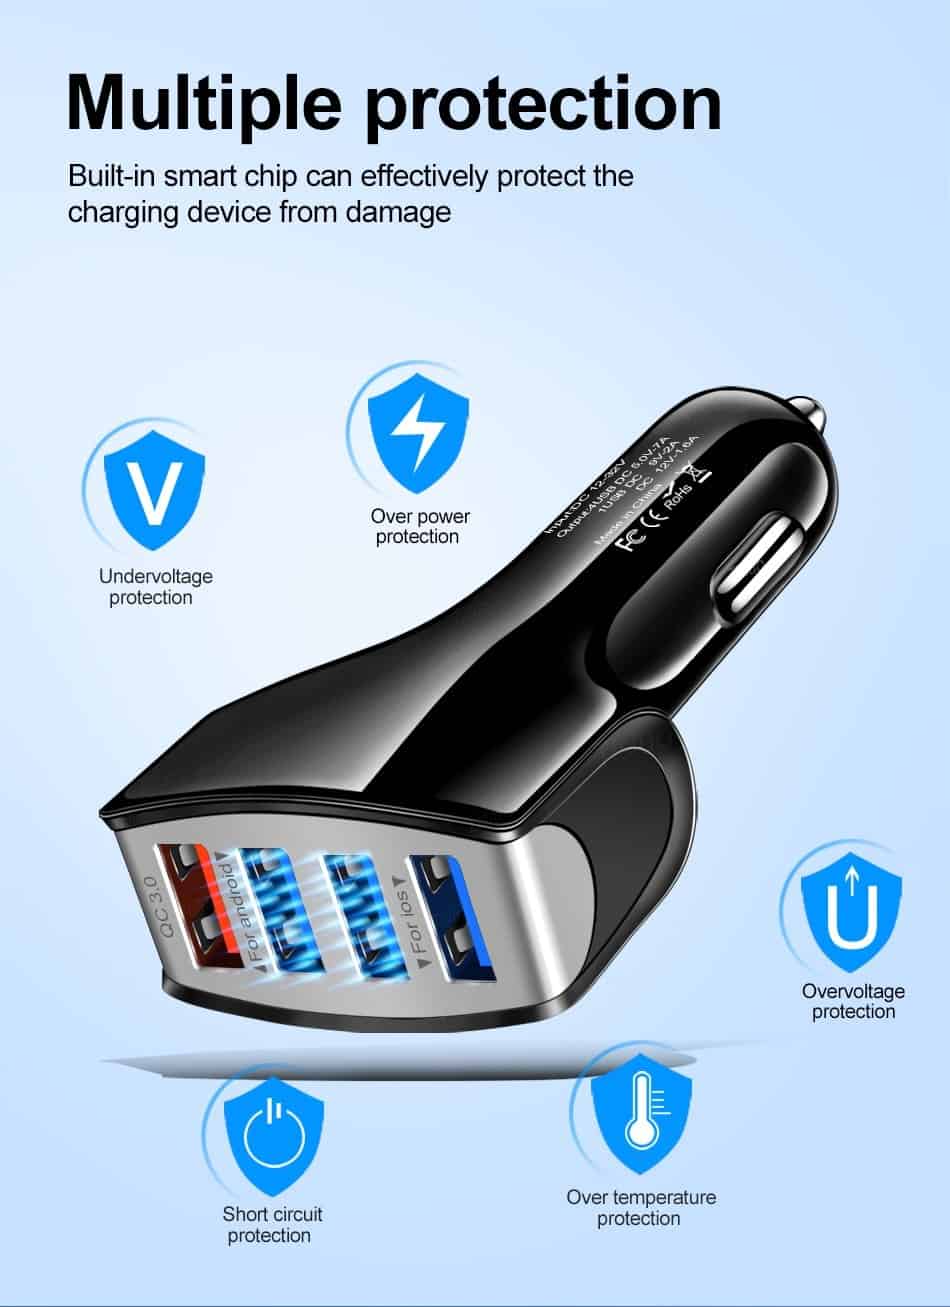 Car Charger Quick Charge 3.0 4 Ports Fast charging QC3.0 Car phone Charger For Samsung Xiaomi iPhone Car Mobile phone Charger